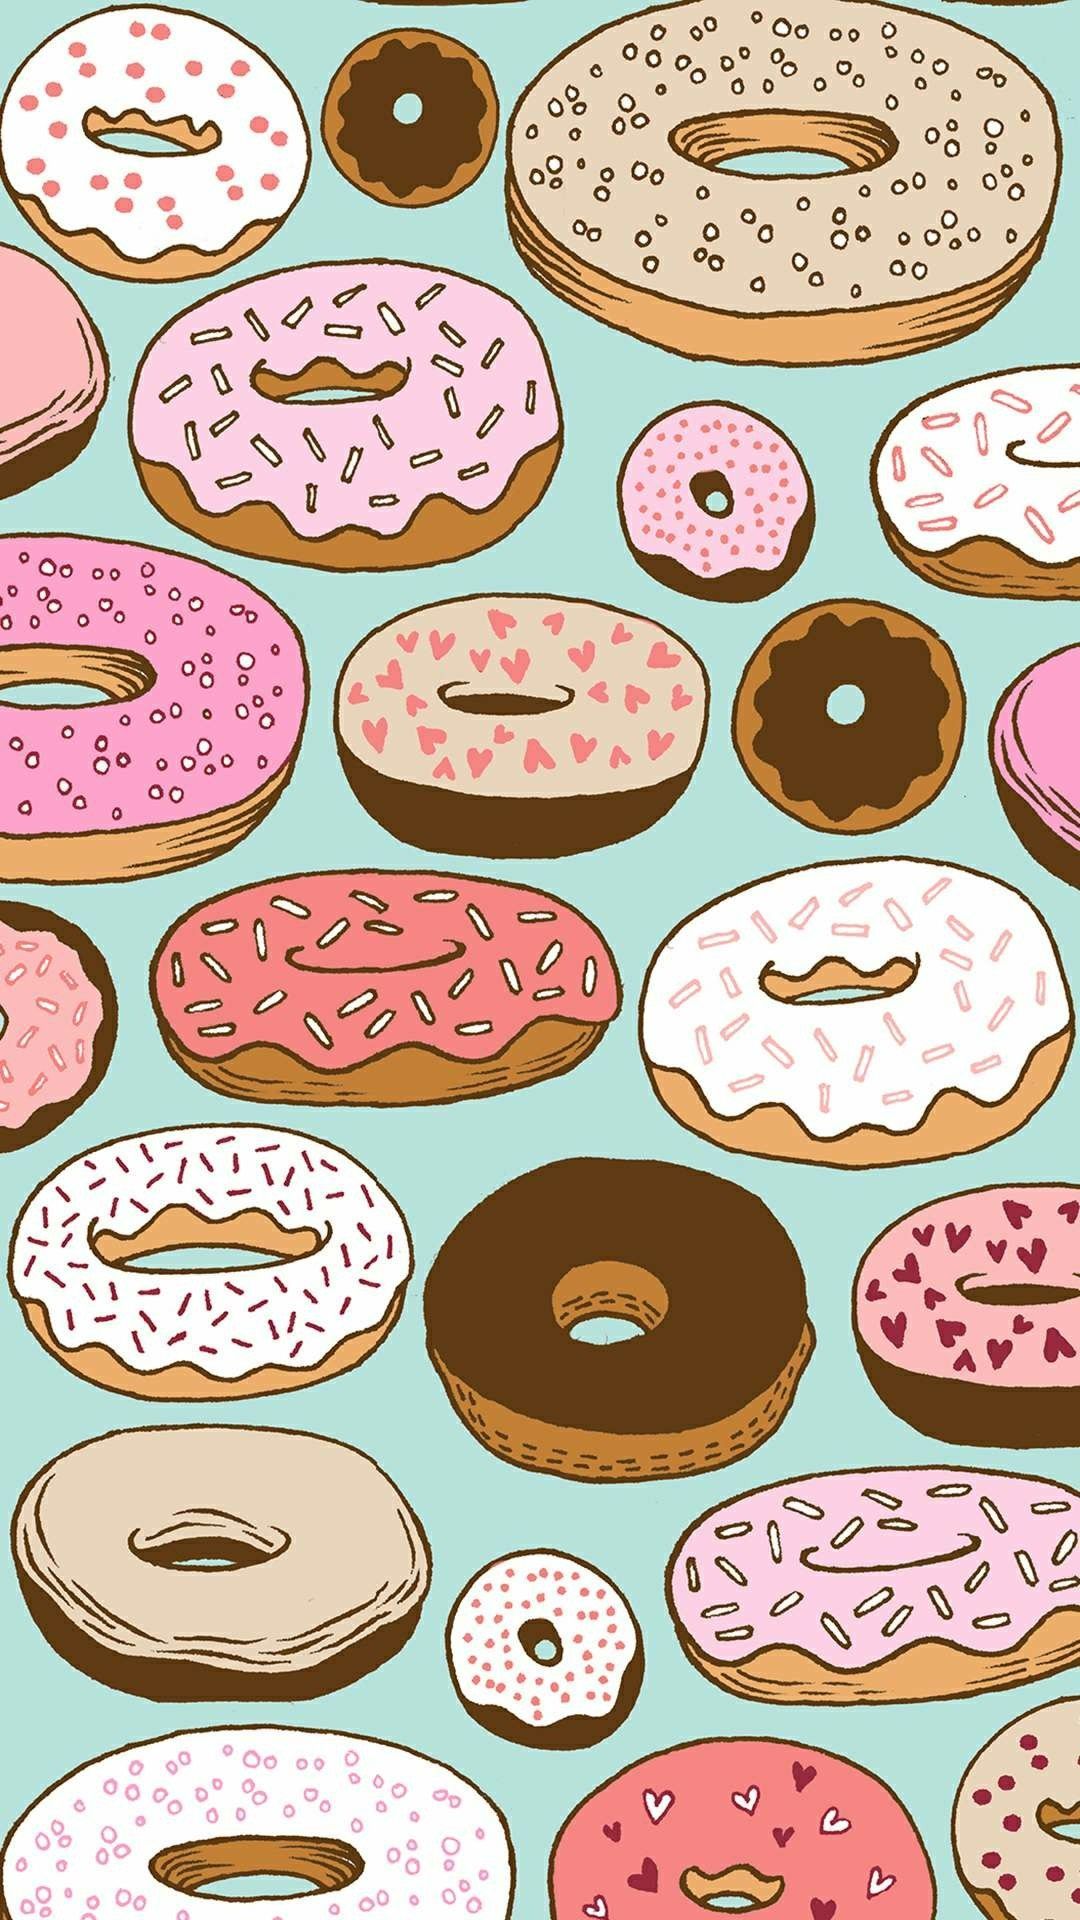 Cute Food Wallpapers Picture, Best Wallpapers Picture, - Background Donuts  - 1080x1920 Wallpaper 